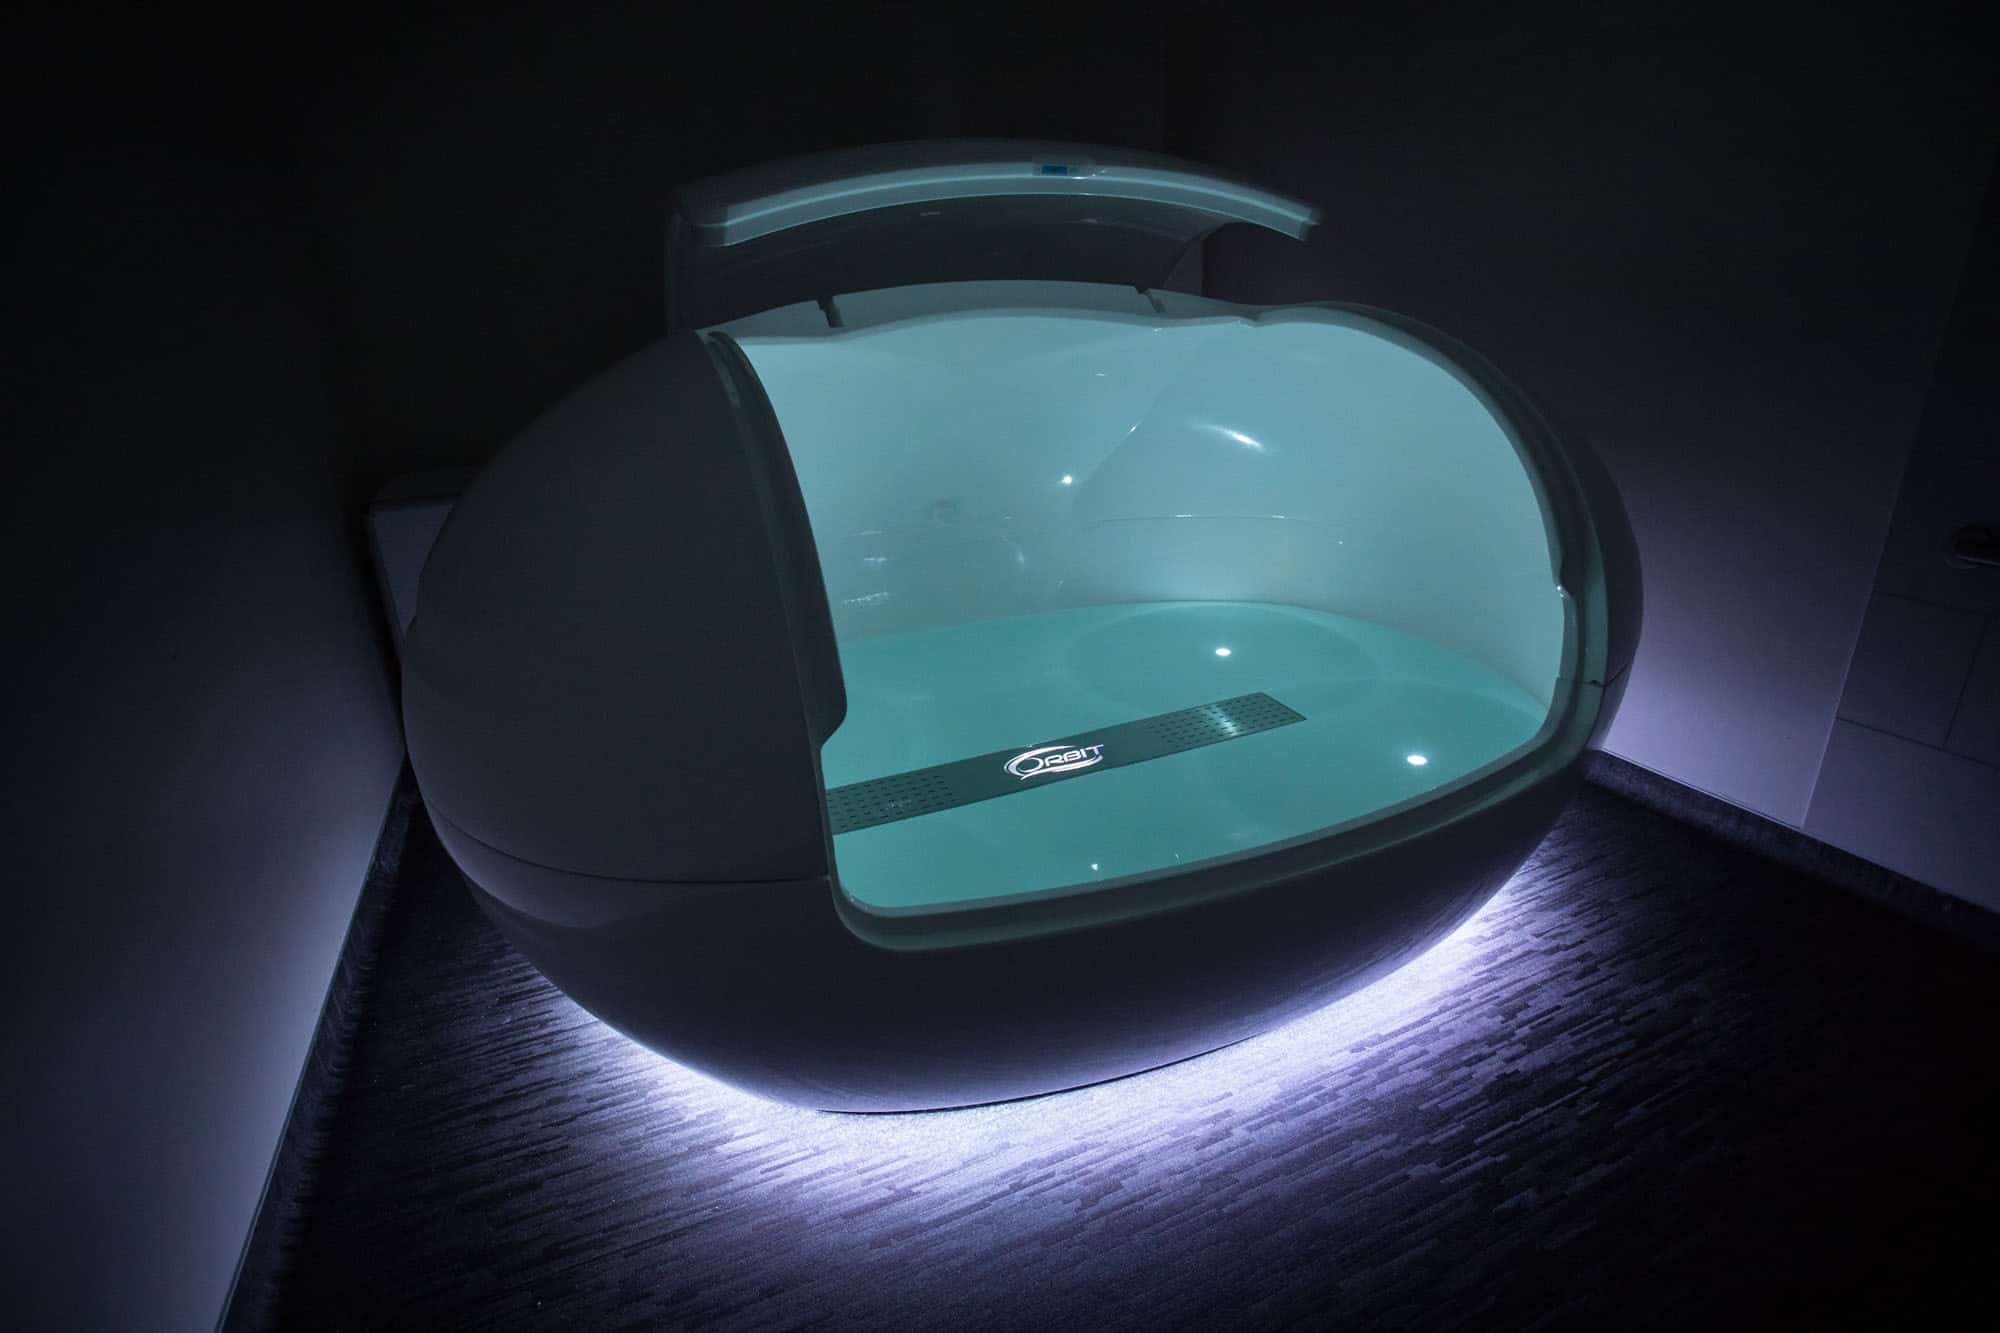 Float Therapy